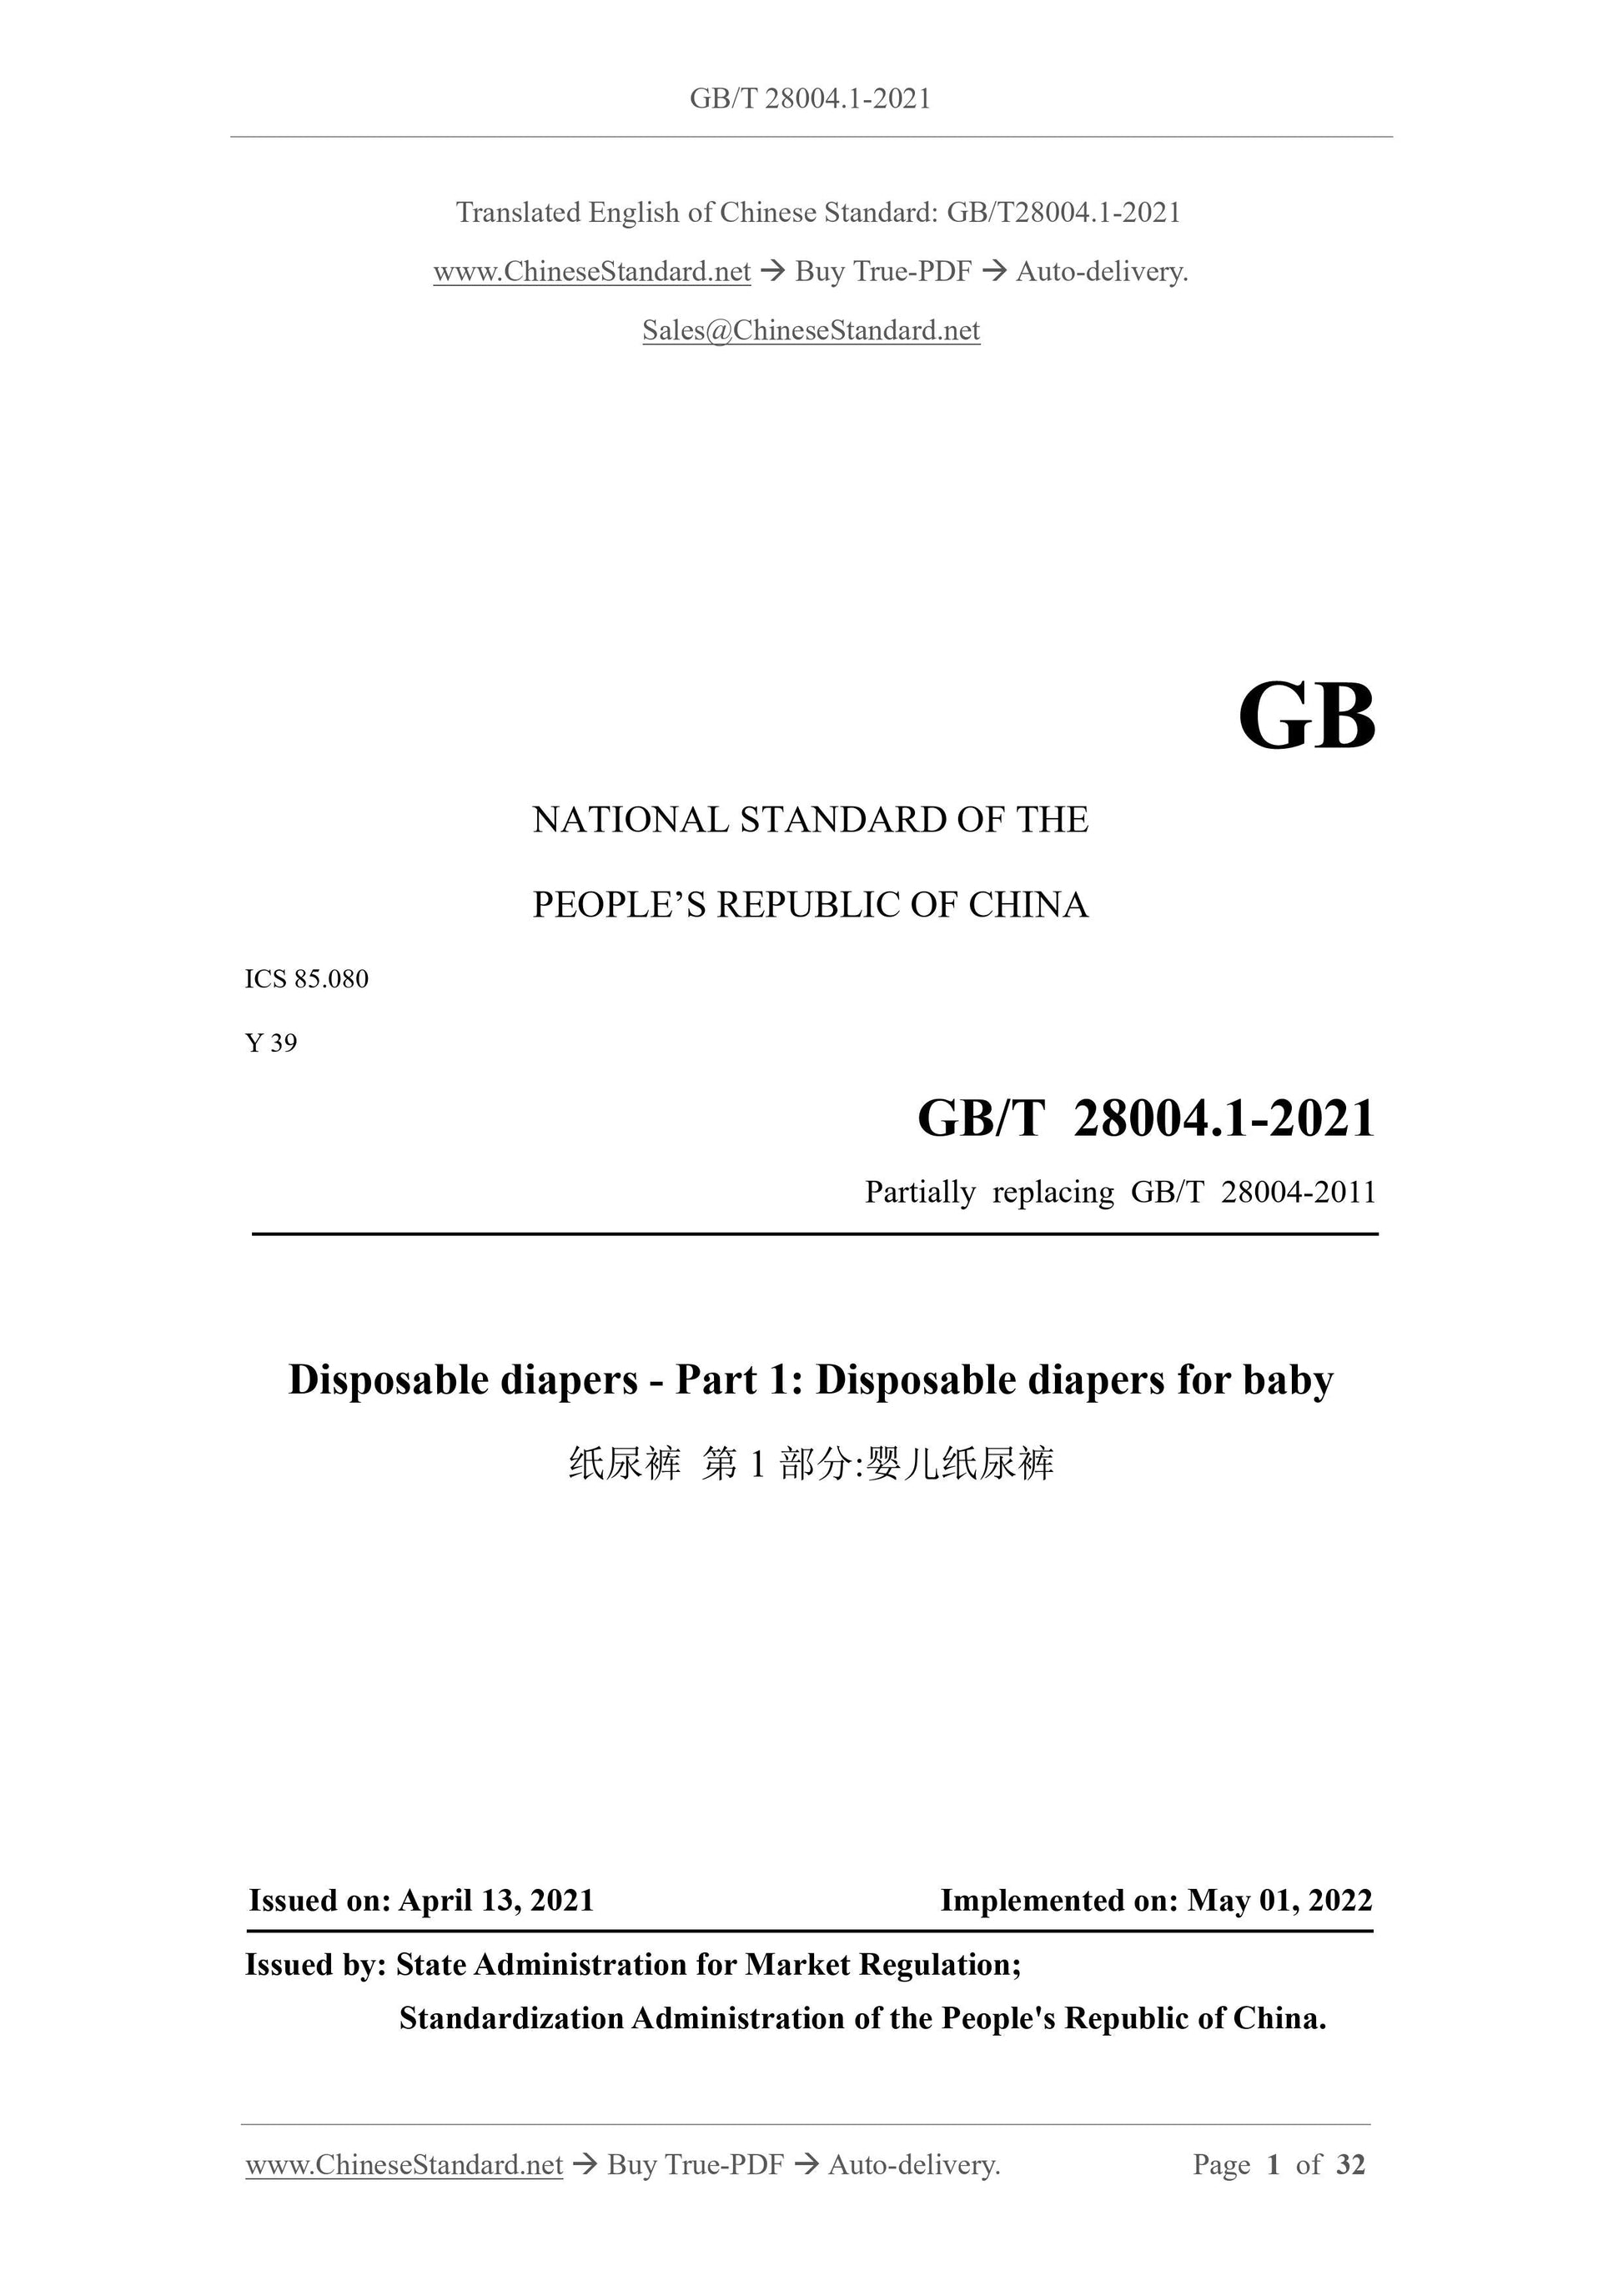 GB/T 28004.1-2021 Page 1